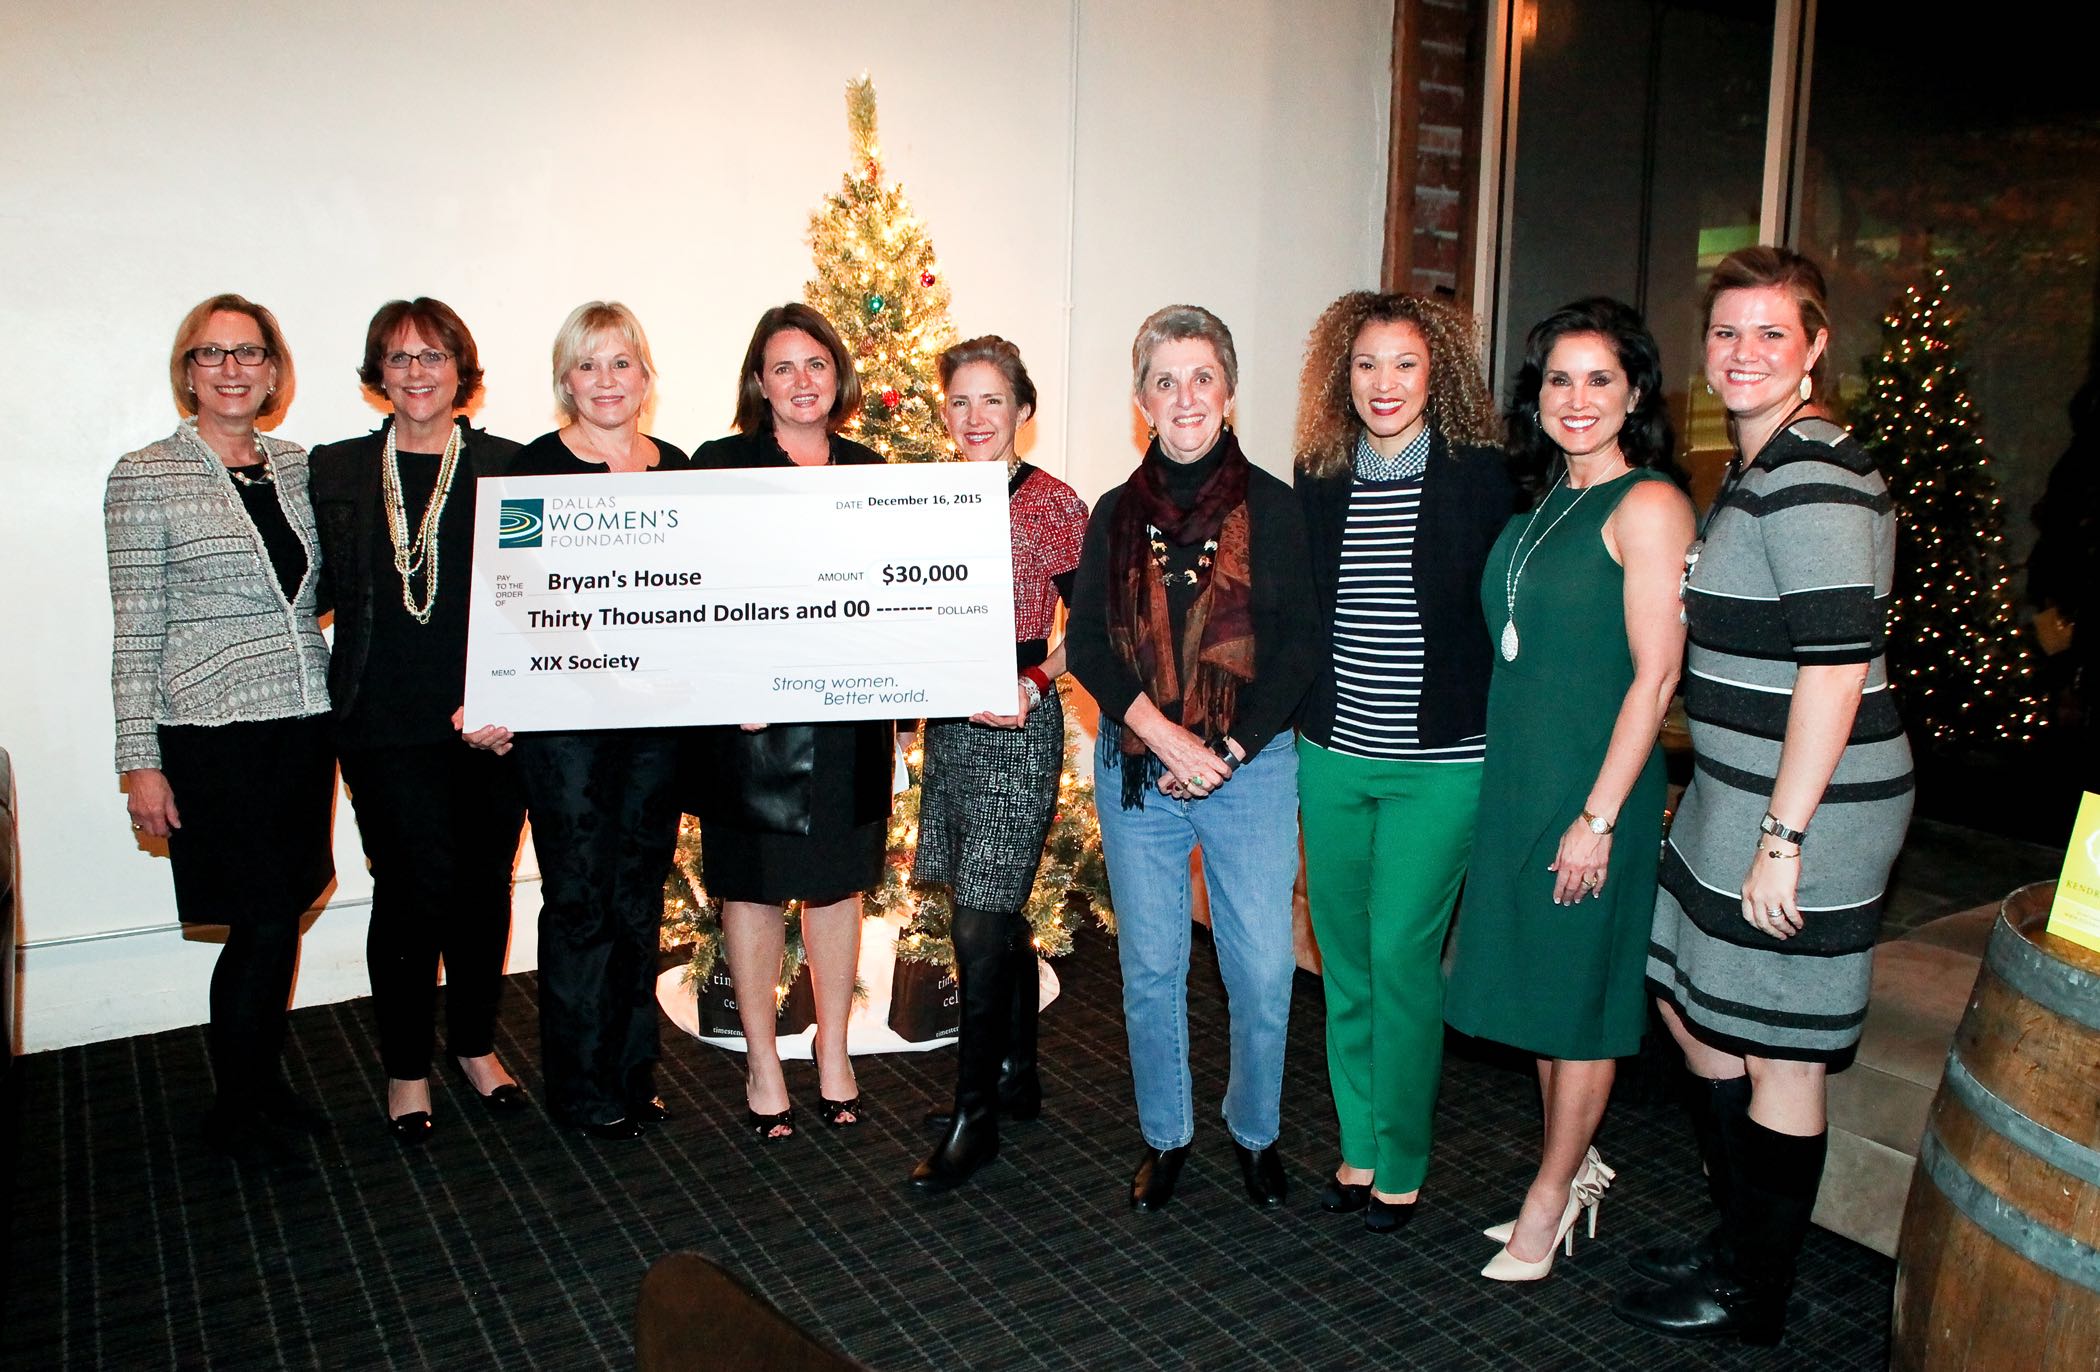 Dallas Womens Foundations Xix Society Awards First Grant To Bryans House